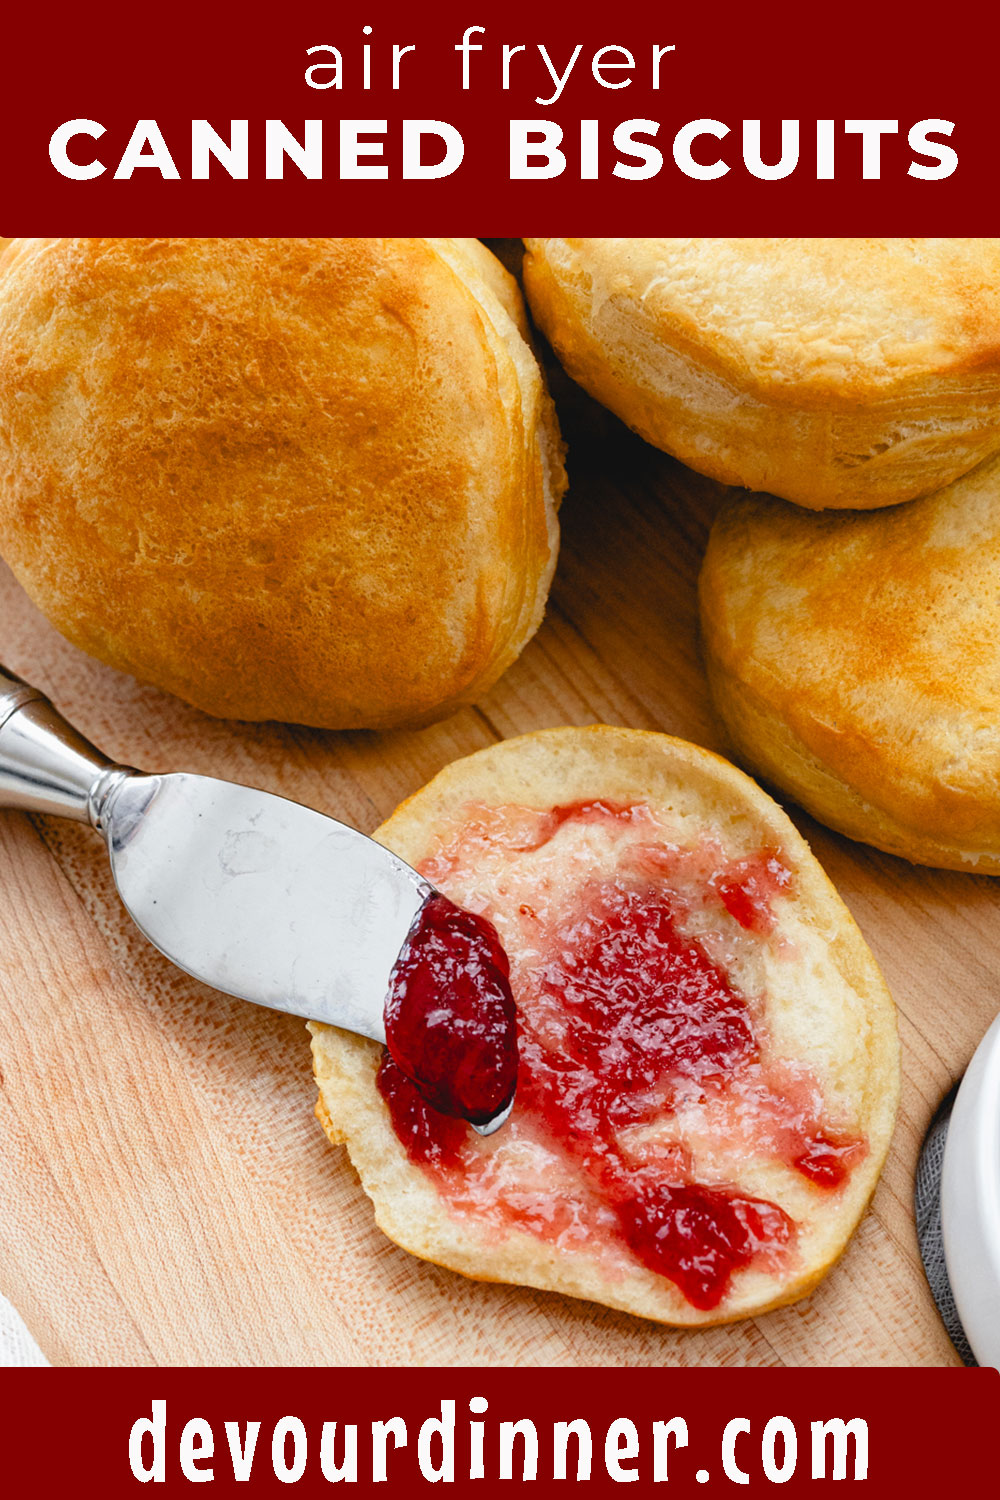 The Air Fryer method is the best way to cook Pillsbury Grand Canned Biscuits as it guarantees perfect biscuits for any occasion, from an easy breakfast on the weekend to speedy weeknight dinners.